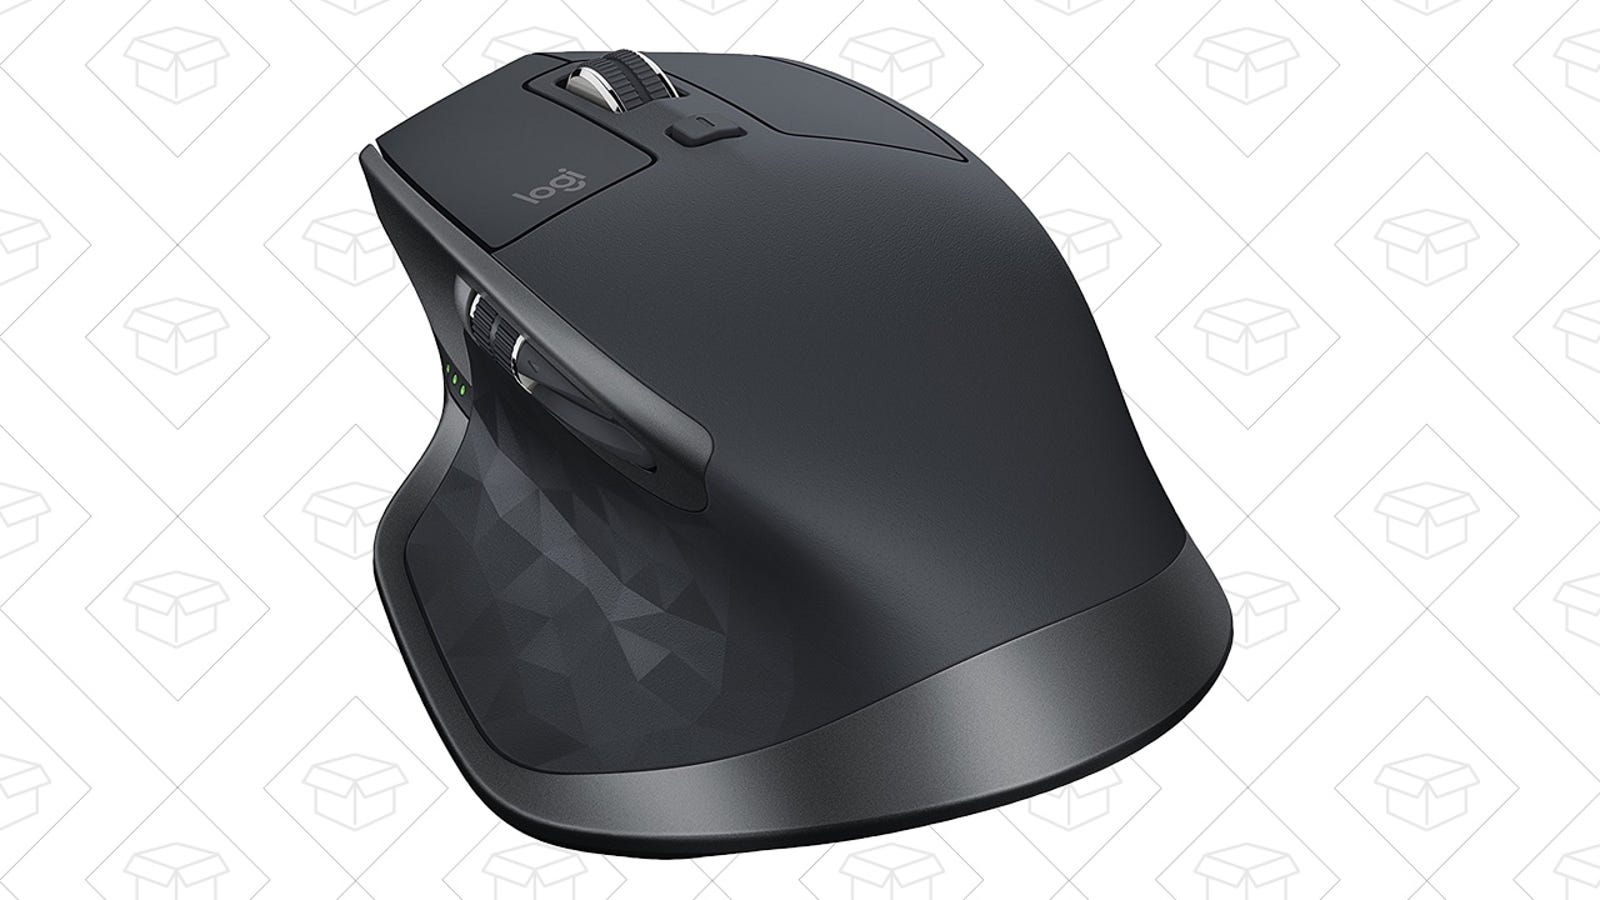 Amazon's Running a Big Discount On One of Logitech's Best Mice